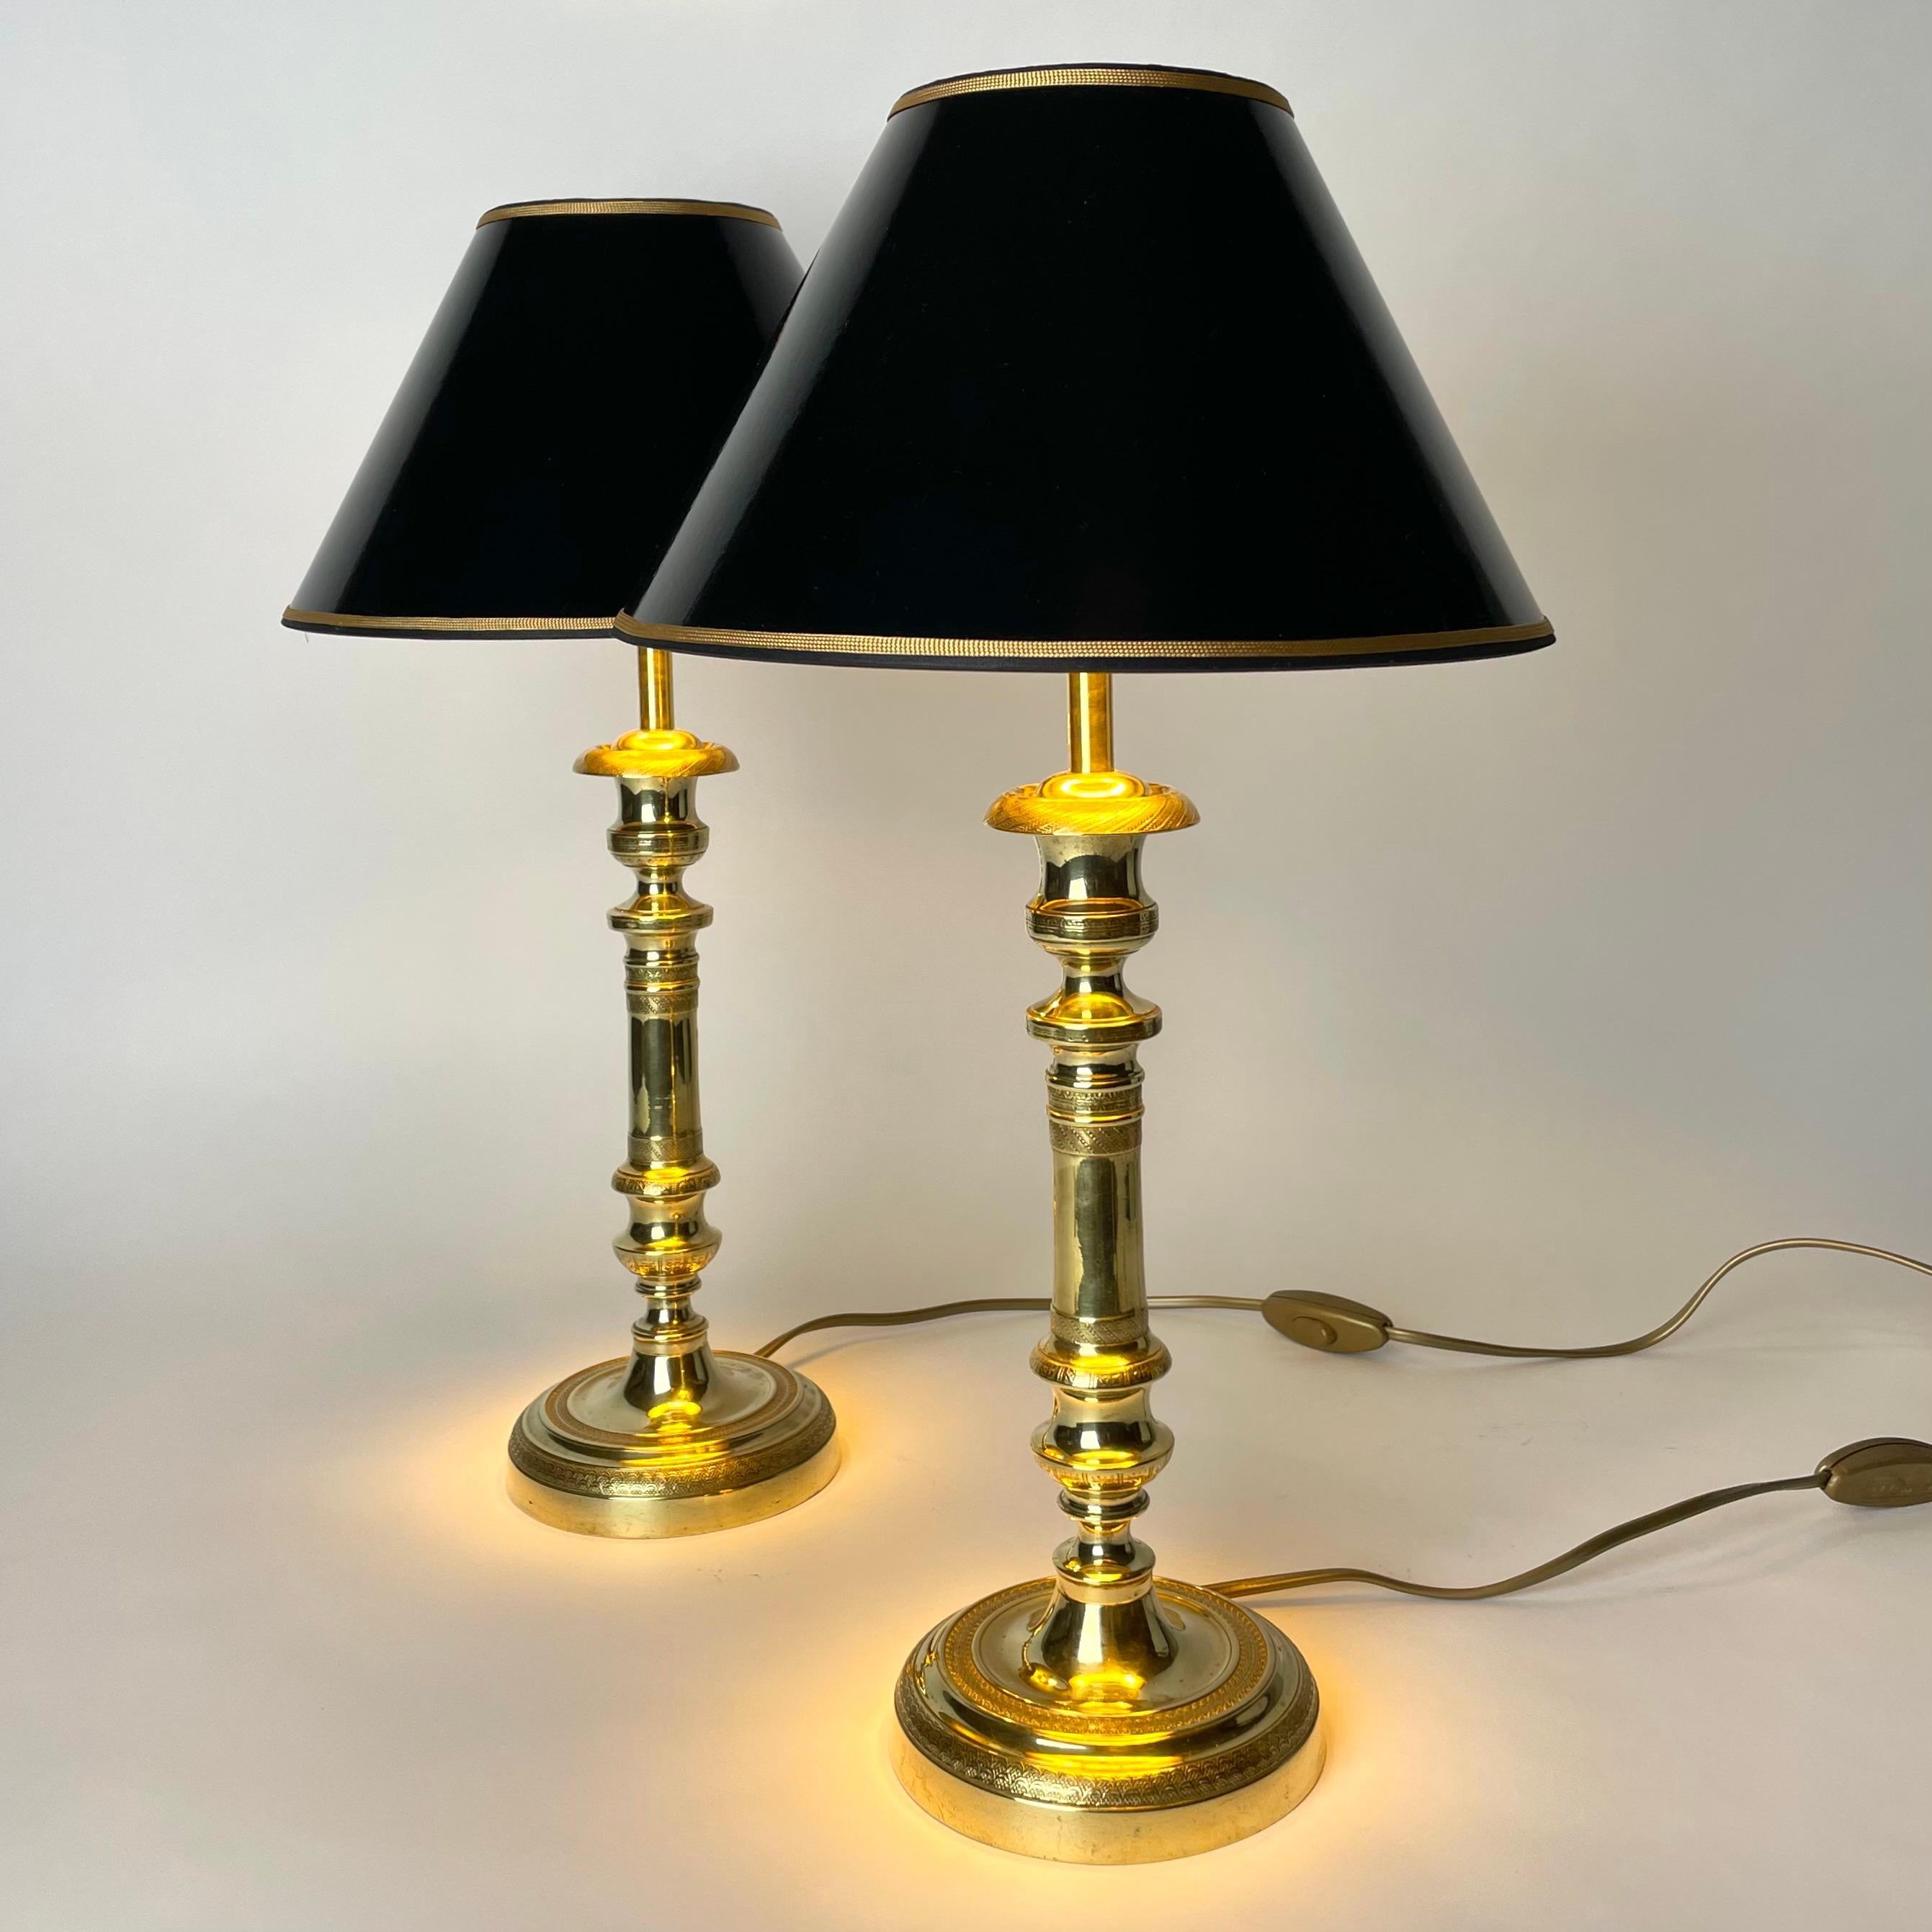 Early 19th Century Elegant pair of Empire Table Lamps, originally candlesticks from the 1820s For Sale